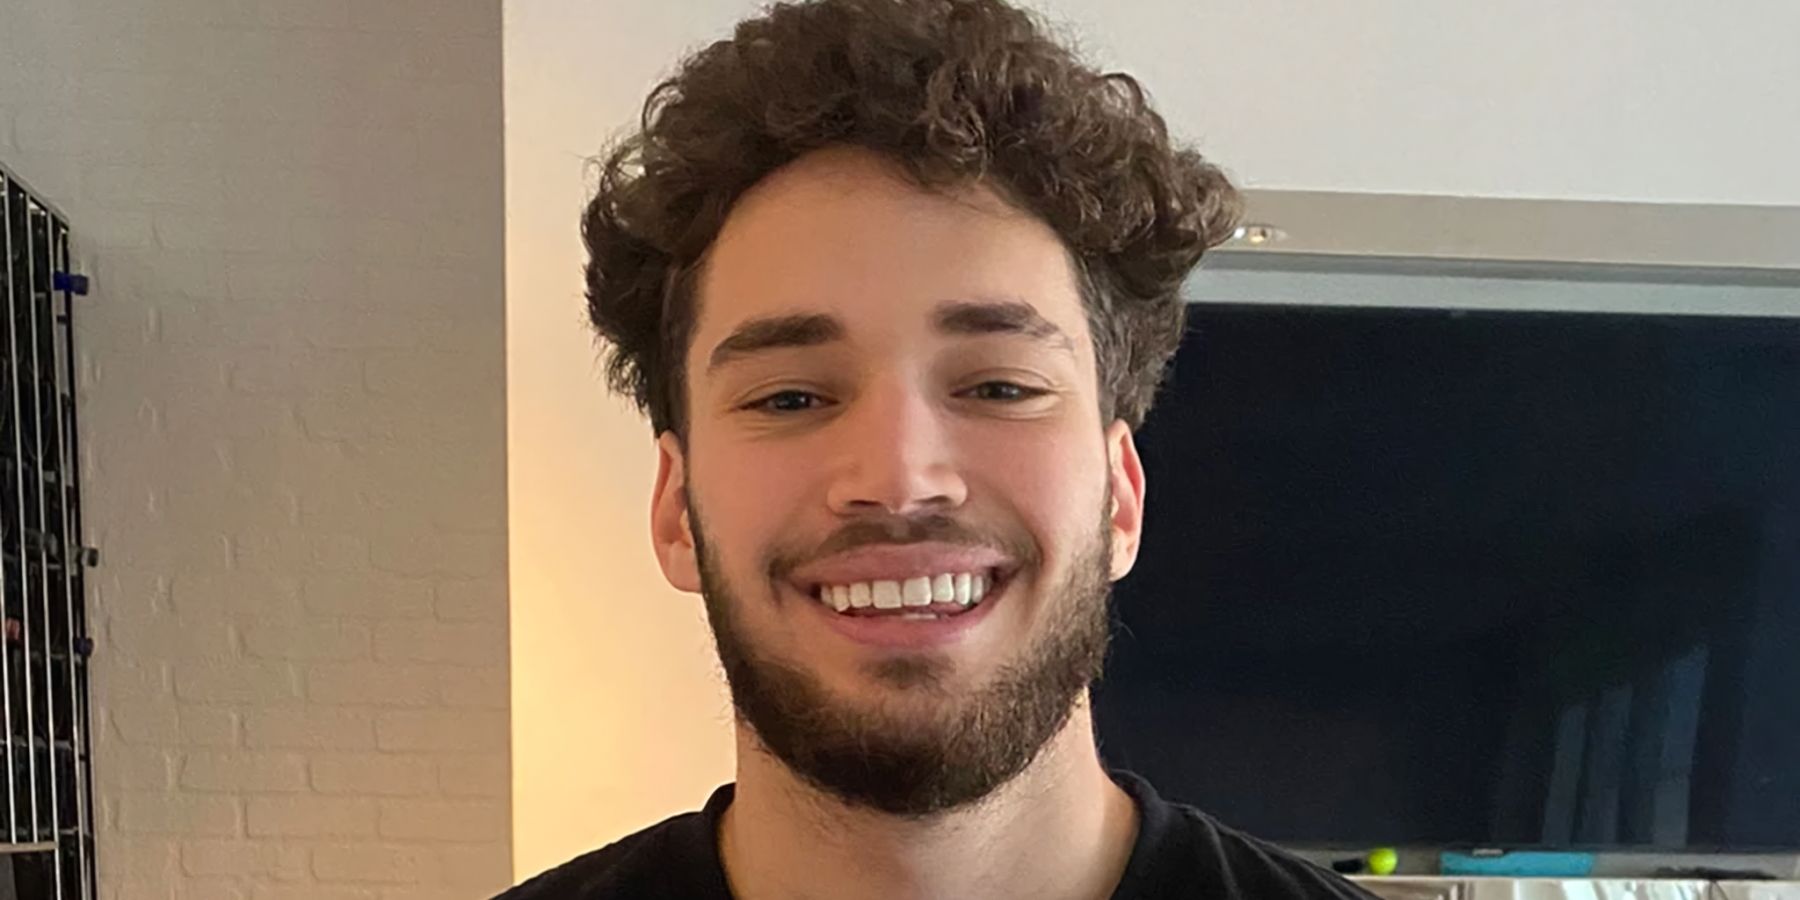 A photo of popular Kick streamer and banned Twitch streamer Adin Ross.